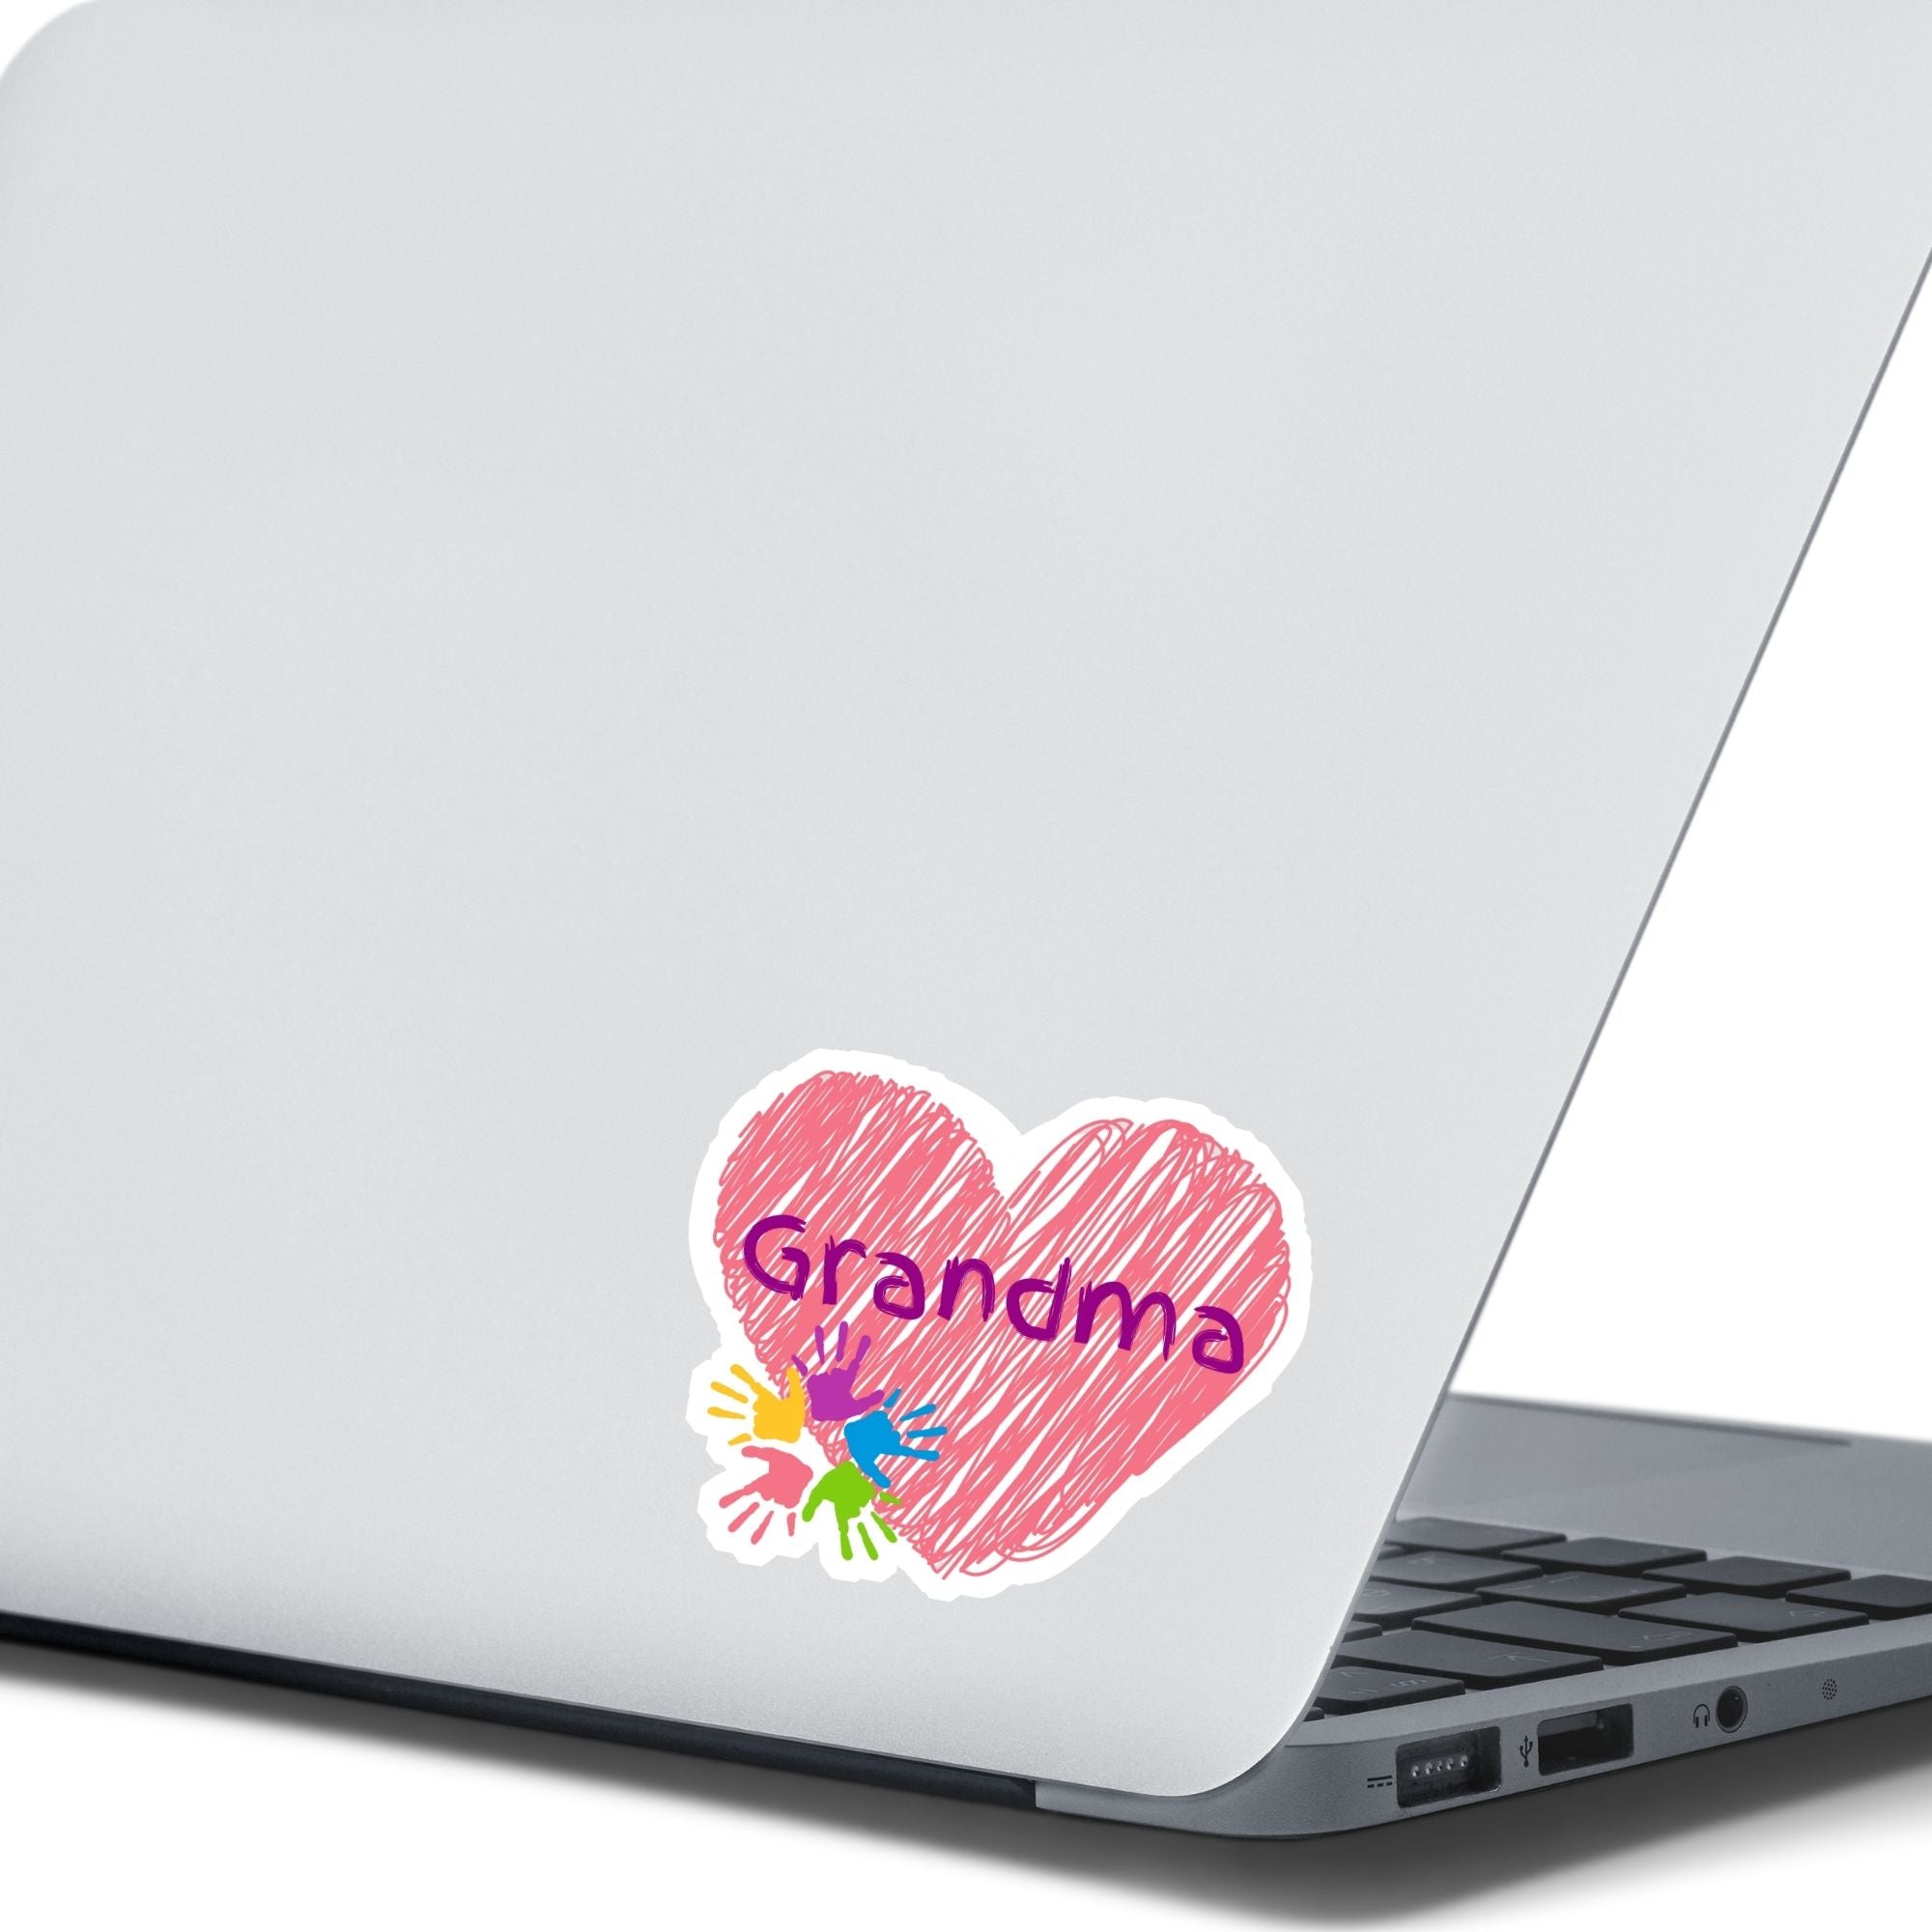 Show how much you love grandma with this individual die-cut sticker. This makes a great gift for grandma, or for all grandma's to proudly show they are a grandmother! This sticker features a red scribbled heart with Grandma written across the middle and 5 small paint hands on the lower left side. This image shows the Grandma sticker on the back of an open laptop.